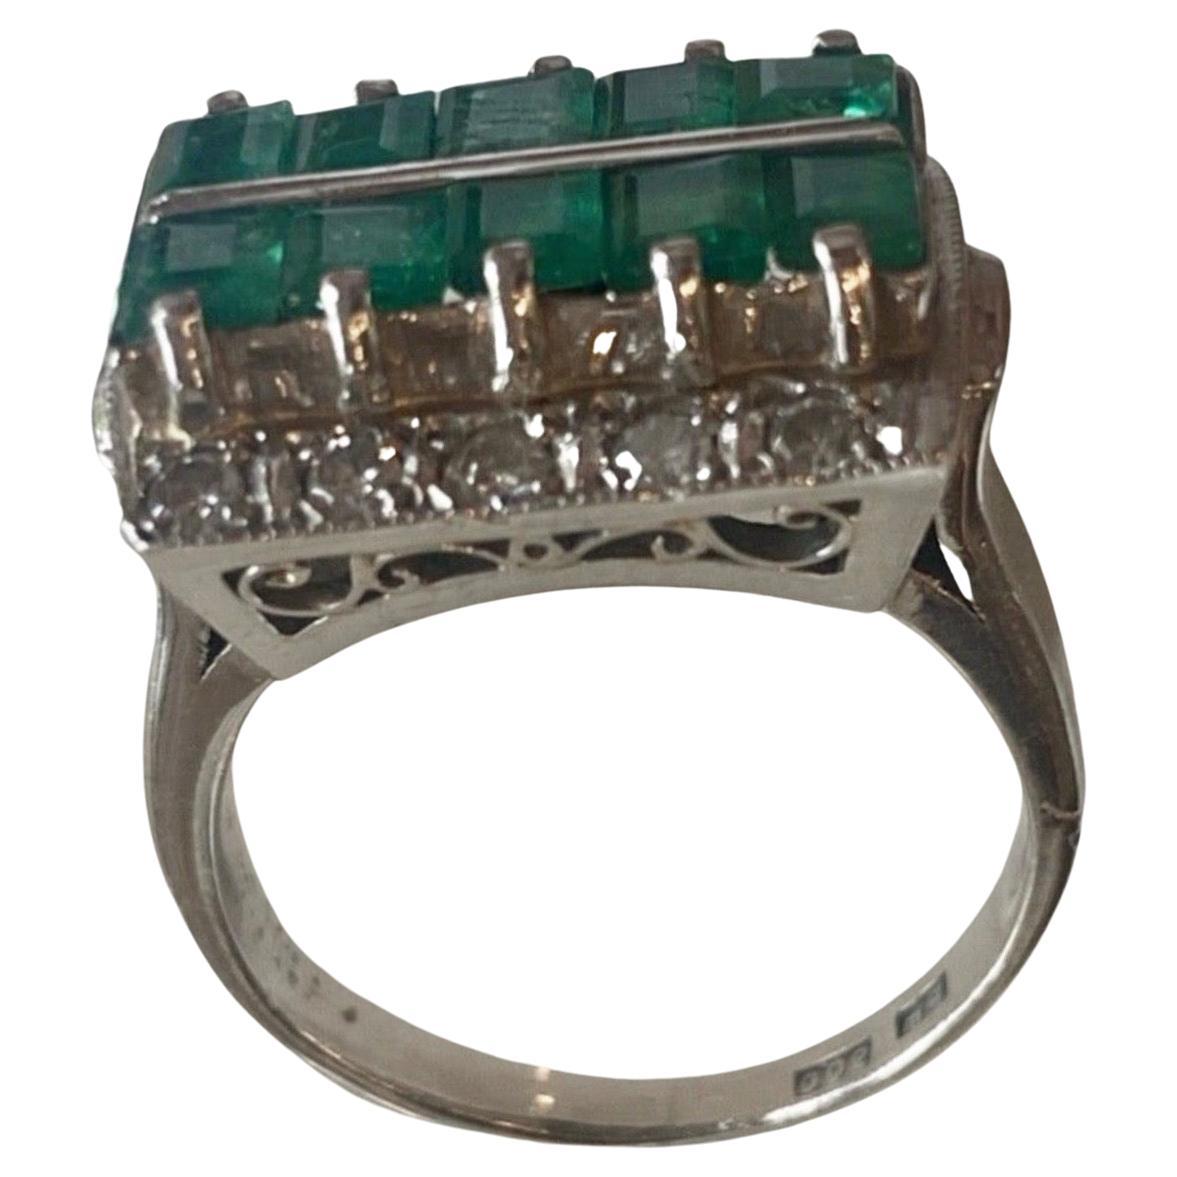 Antique Art Deco 3.50 Carats Emerald and Diamond Platinum Engagement Ring. 
The center features ten Asscher Cut-shaped emeralds, totaling 3.00 carats. Right below the stones, there are twelve round single-cut diamonds that enhance the sparkle and